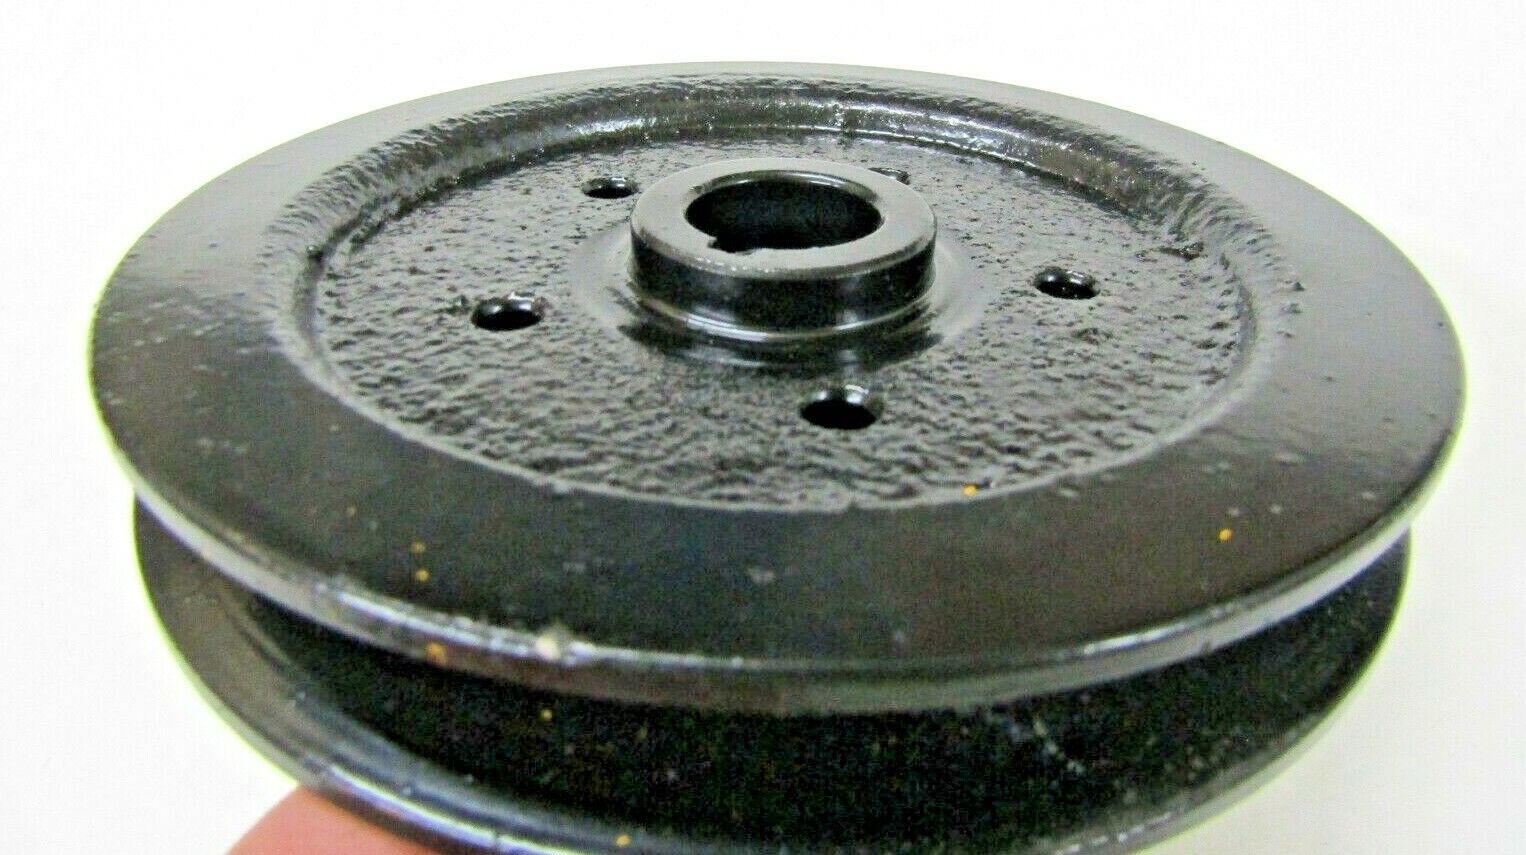 REPLACEMENT PULLEY SHEAVE  BUSH HOG 50074053, FITS ON ALL 50051388 SPINDLES - 0